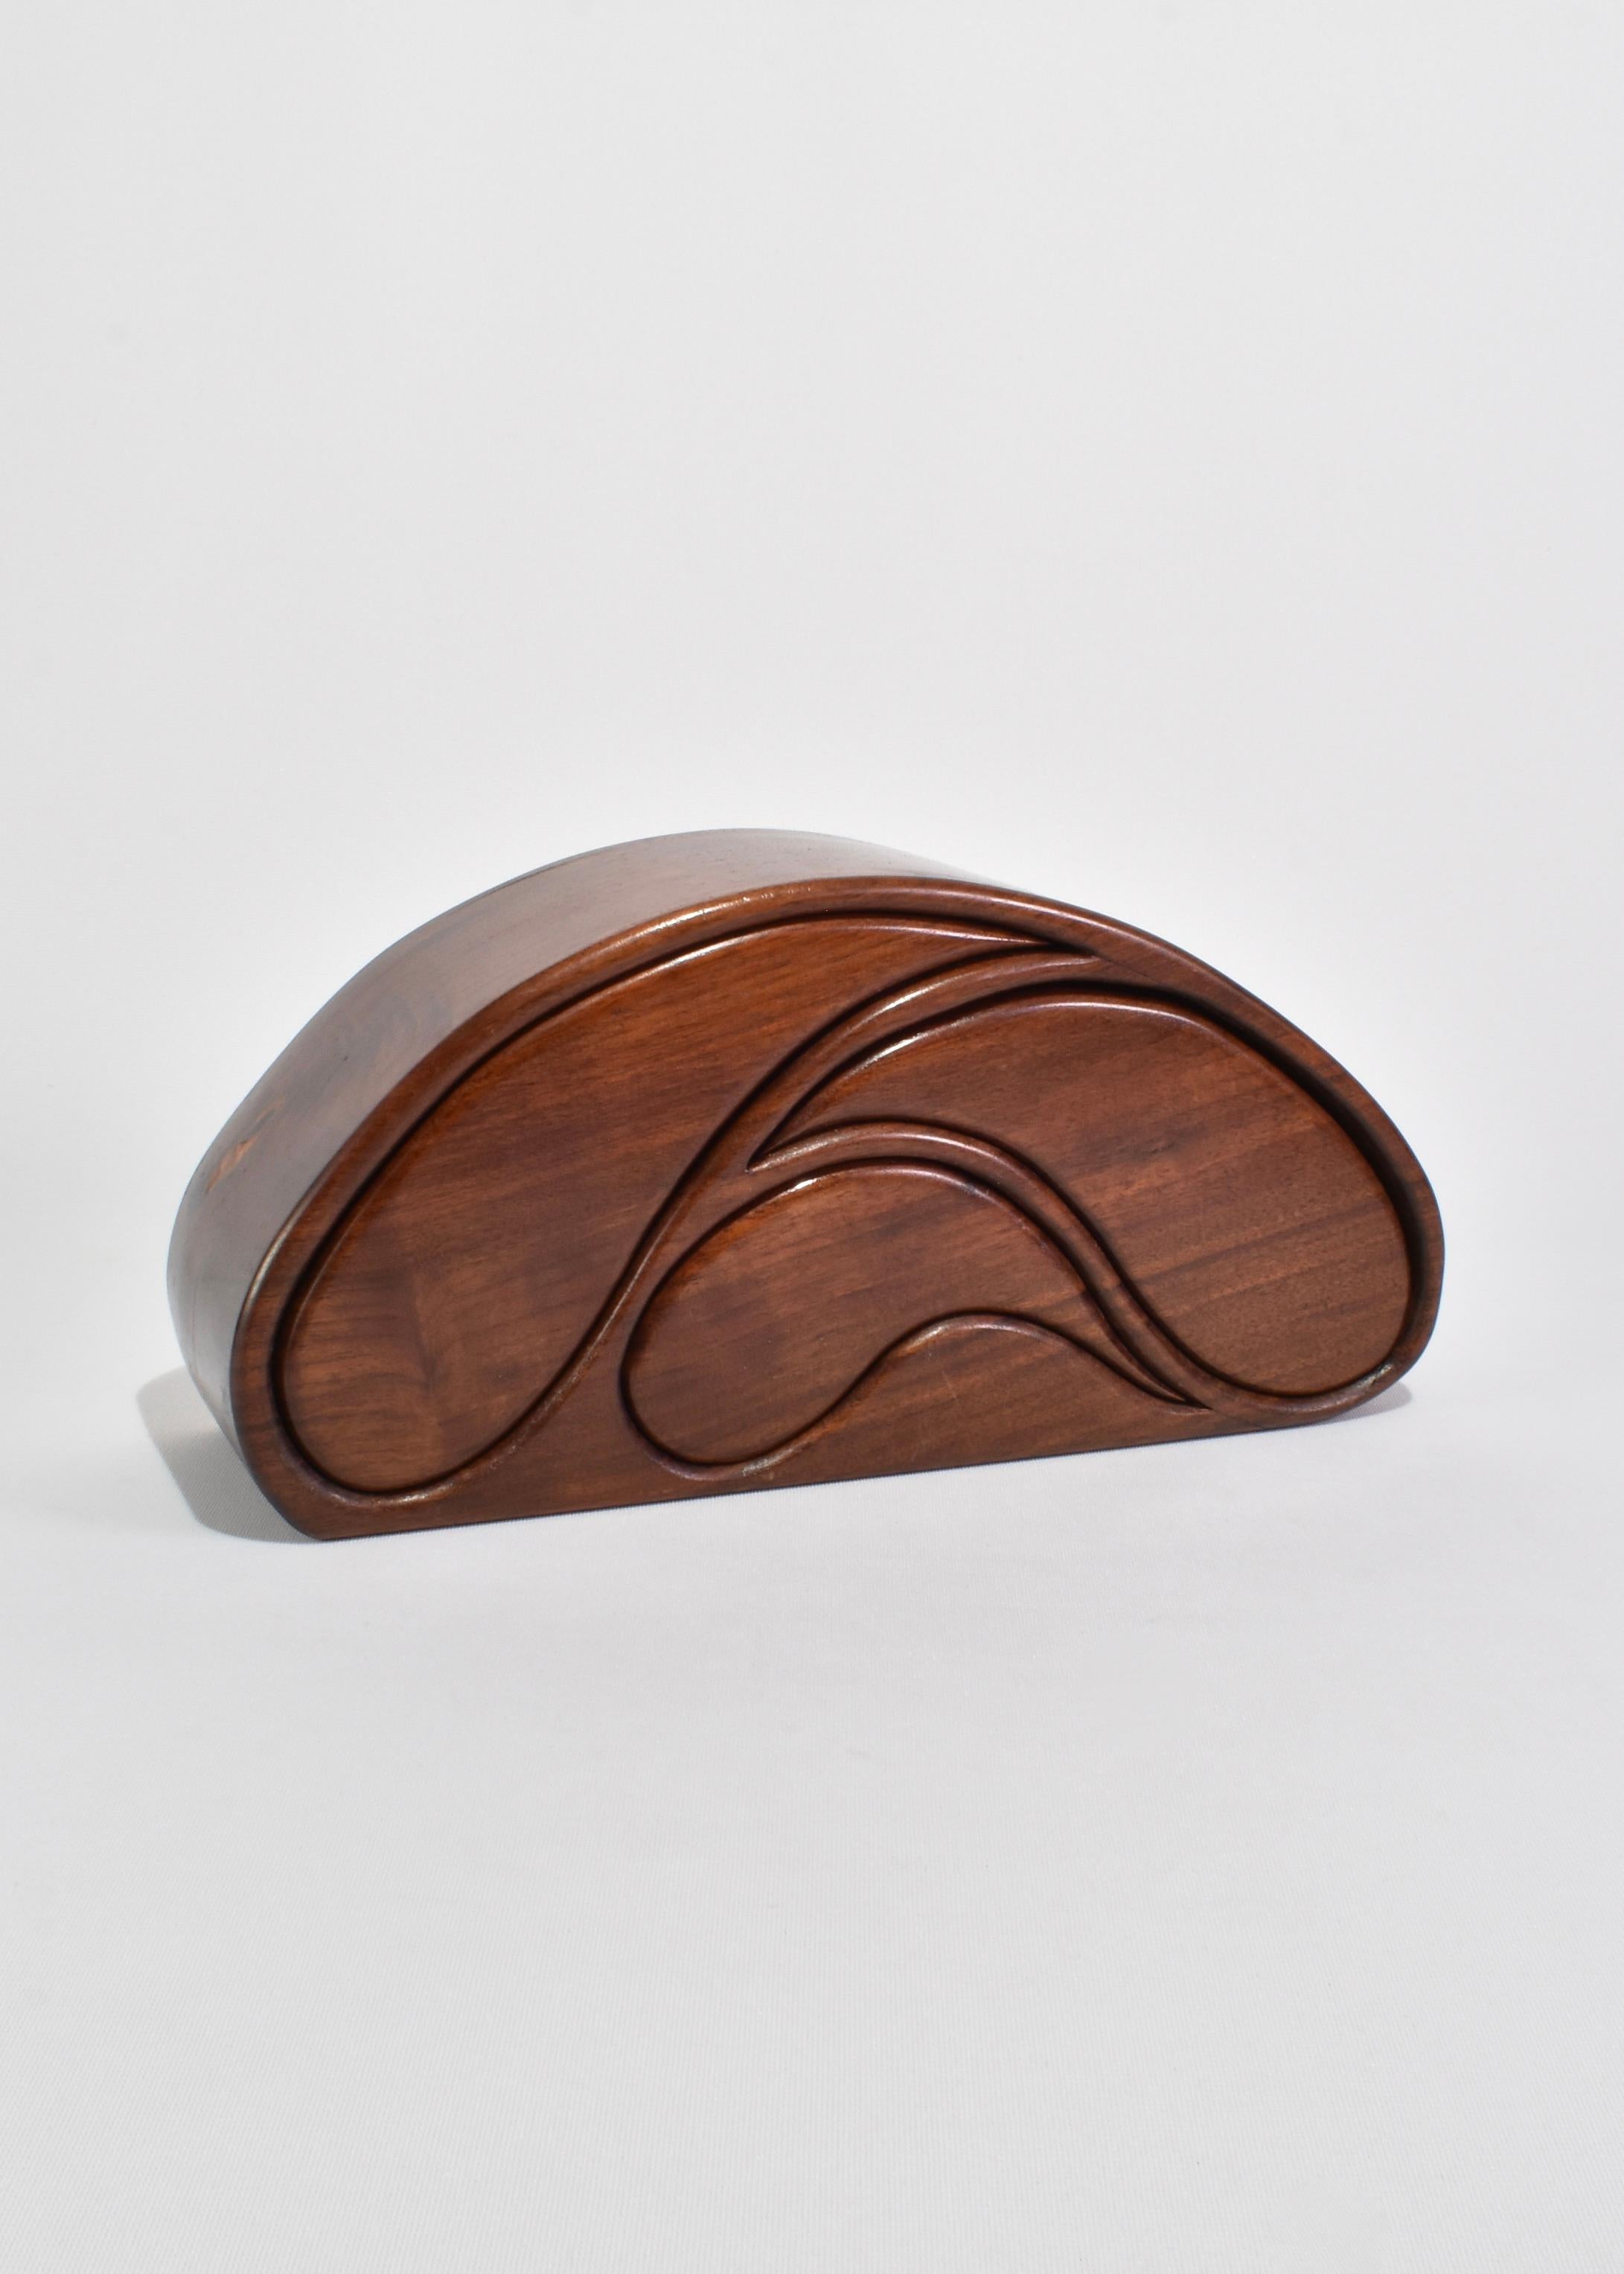 Hand-Crafted Curved Wooden Jewelry Box For Sale